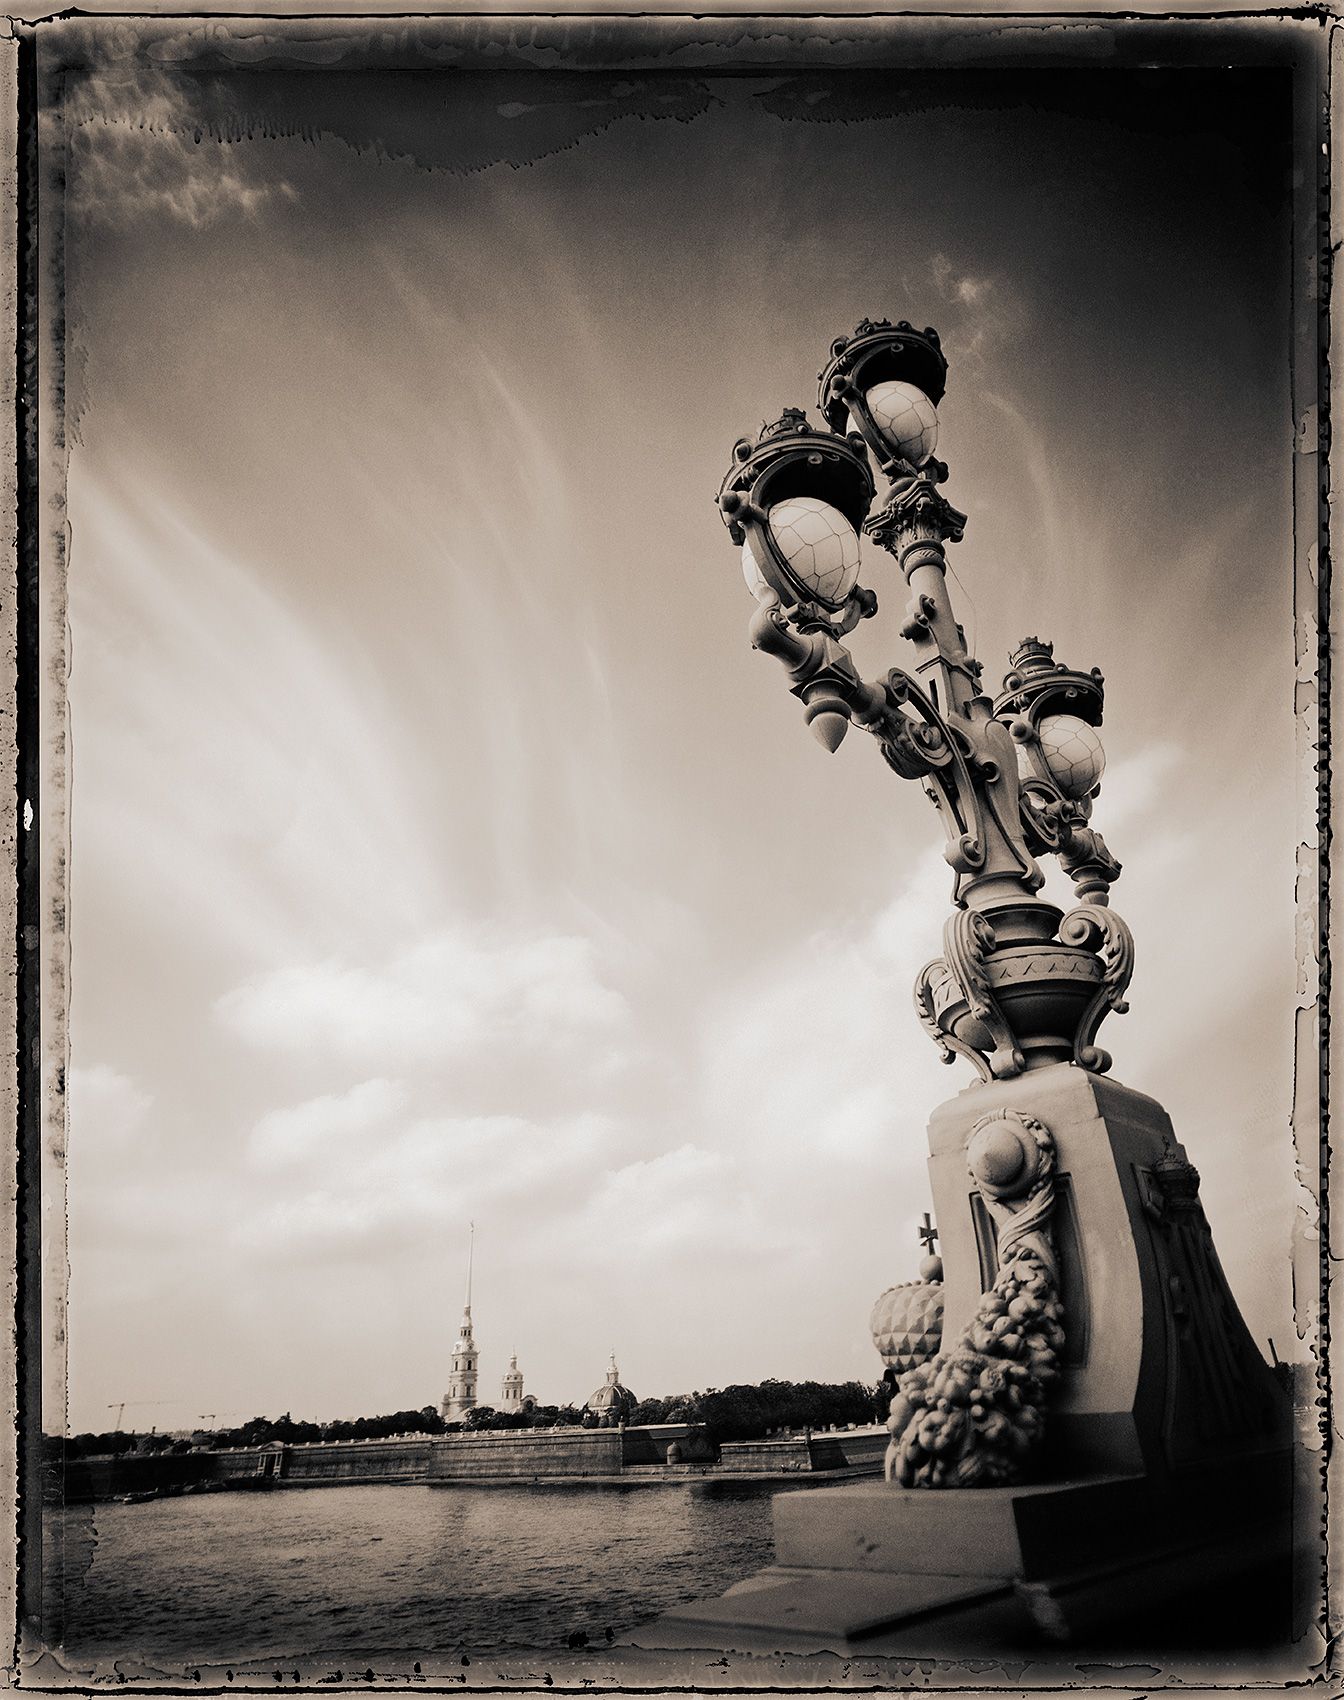 Bridge Lamp and Distant Fortress, St. Petersburg, Russia